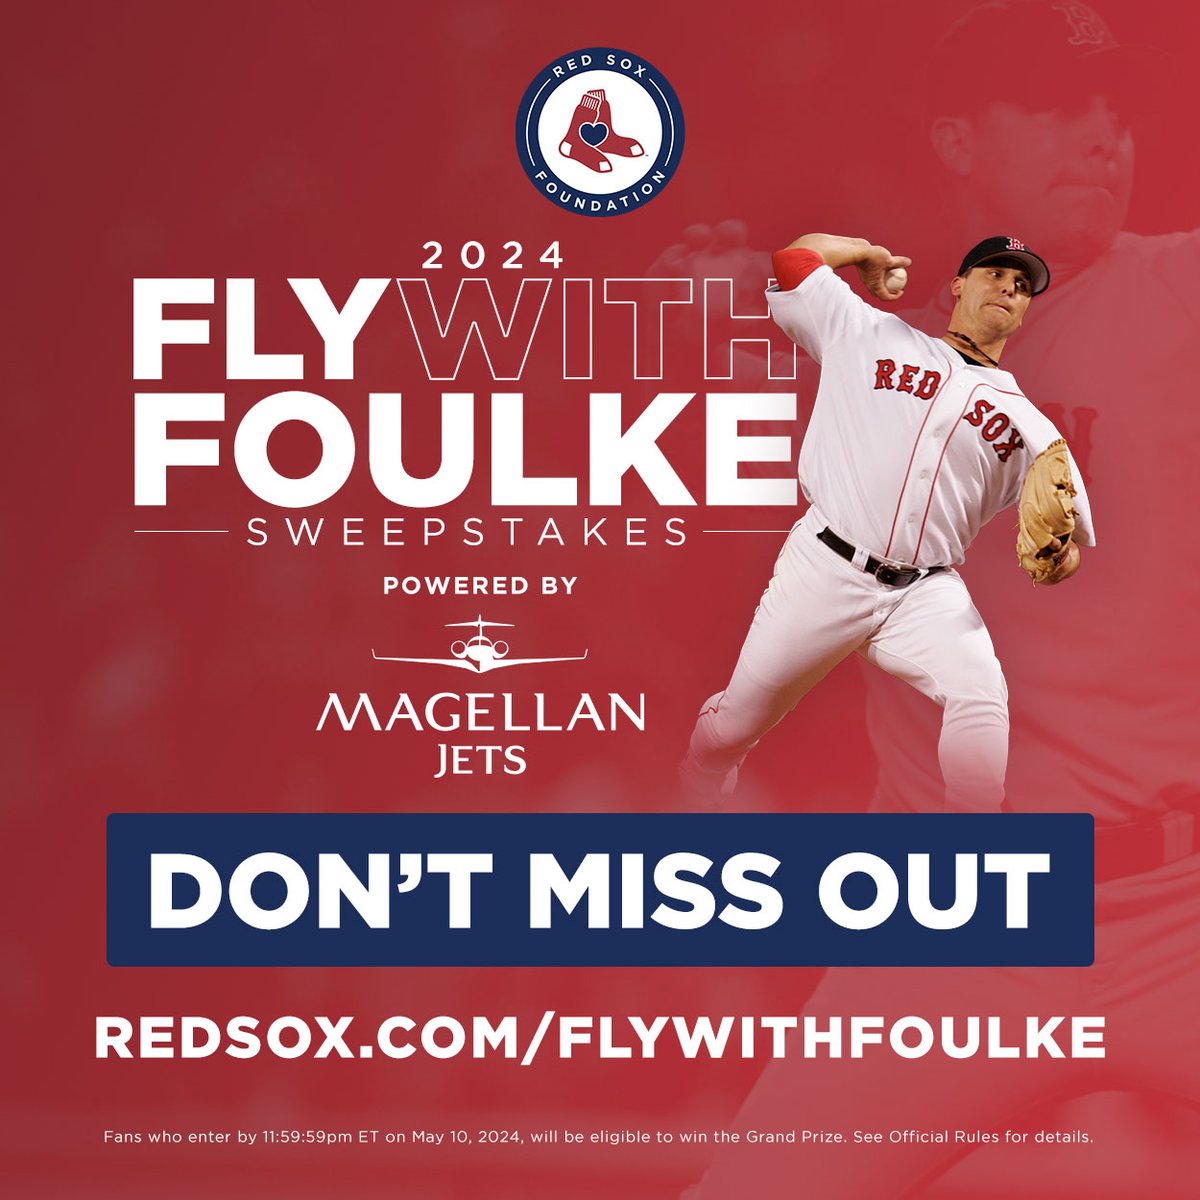 There is still time to enter for your chance to win our Fly With Foulke Sweeps! Enter today at redsox.com/flywithfoulke. ✈️